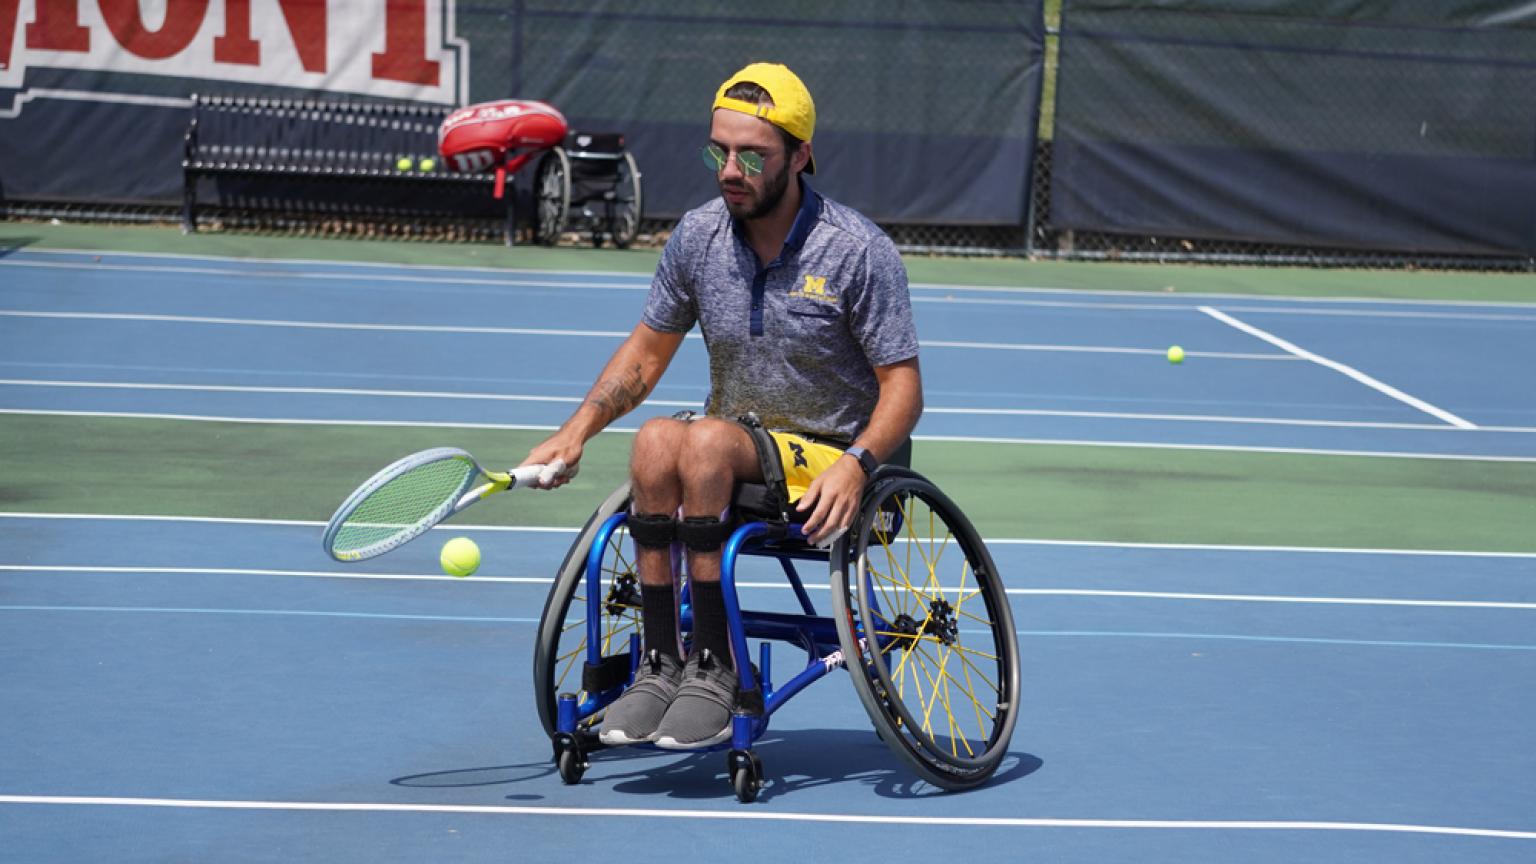 A tennis player practices bouncing the ball to prepare for his game. 